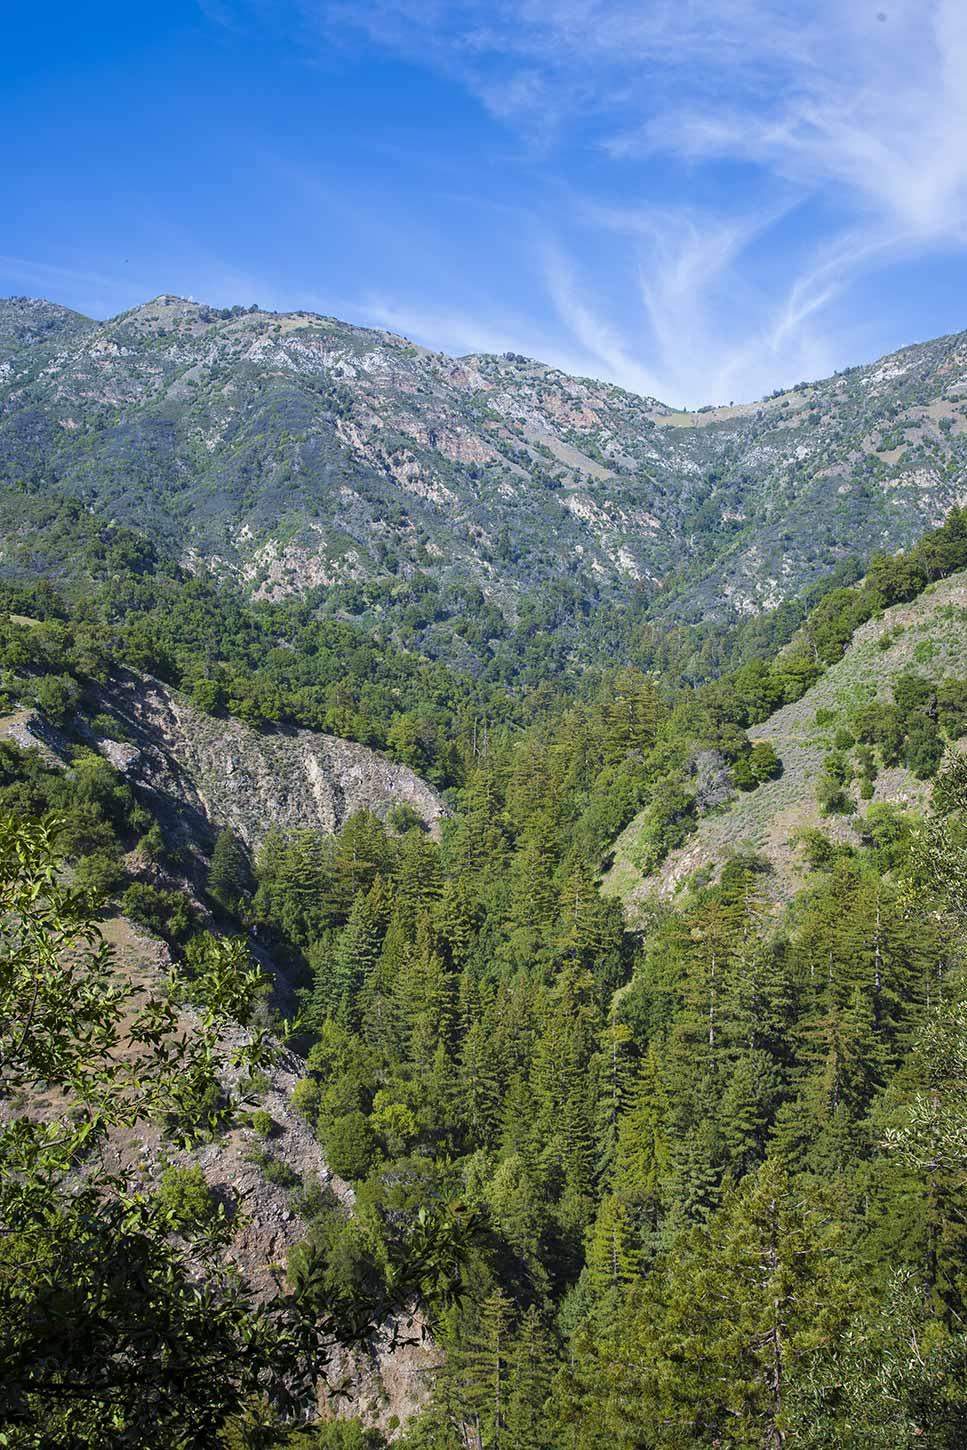 Hare Canyon and Vicente Flat seen from the Vicente Flat Trail in Los Padres National Forest, Big Sur